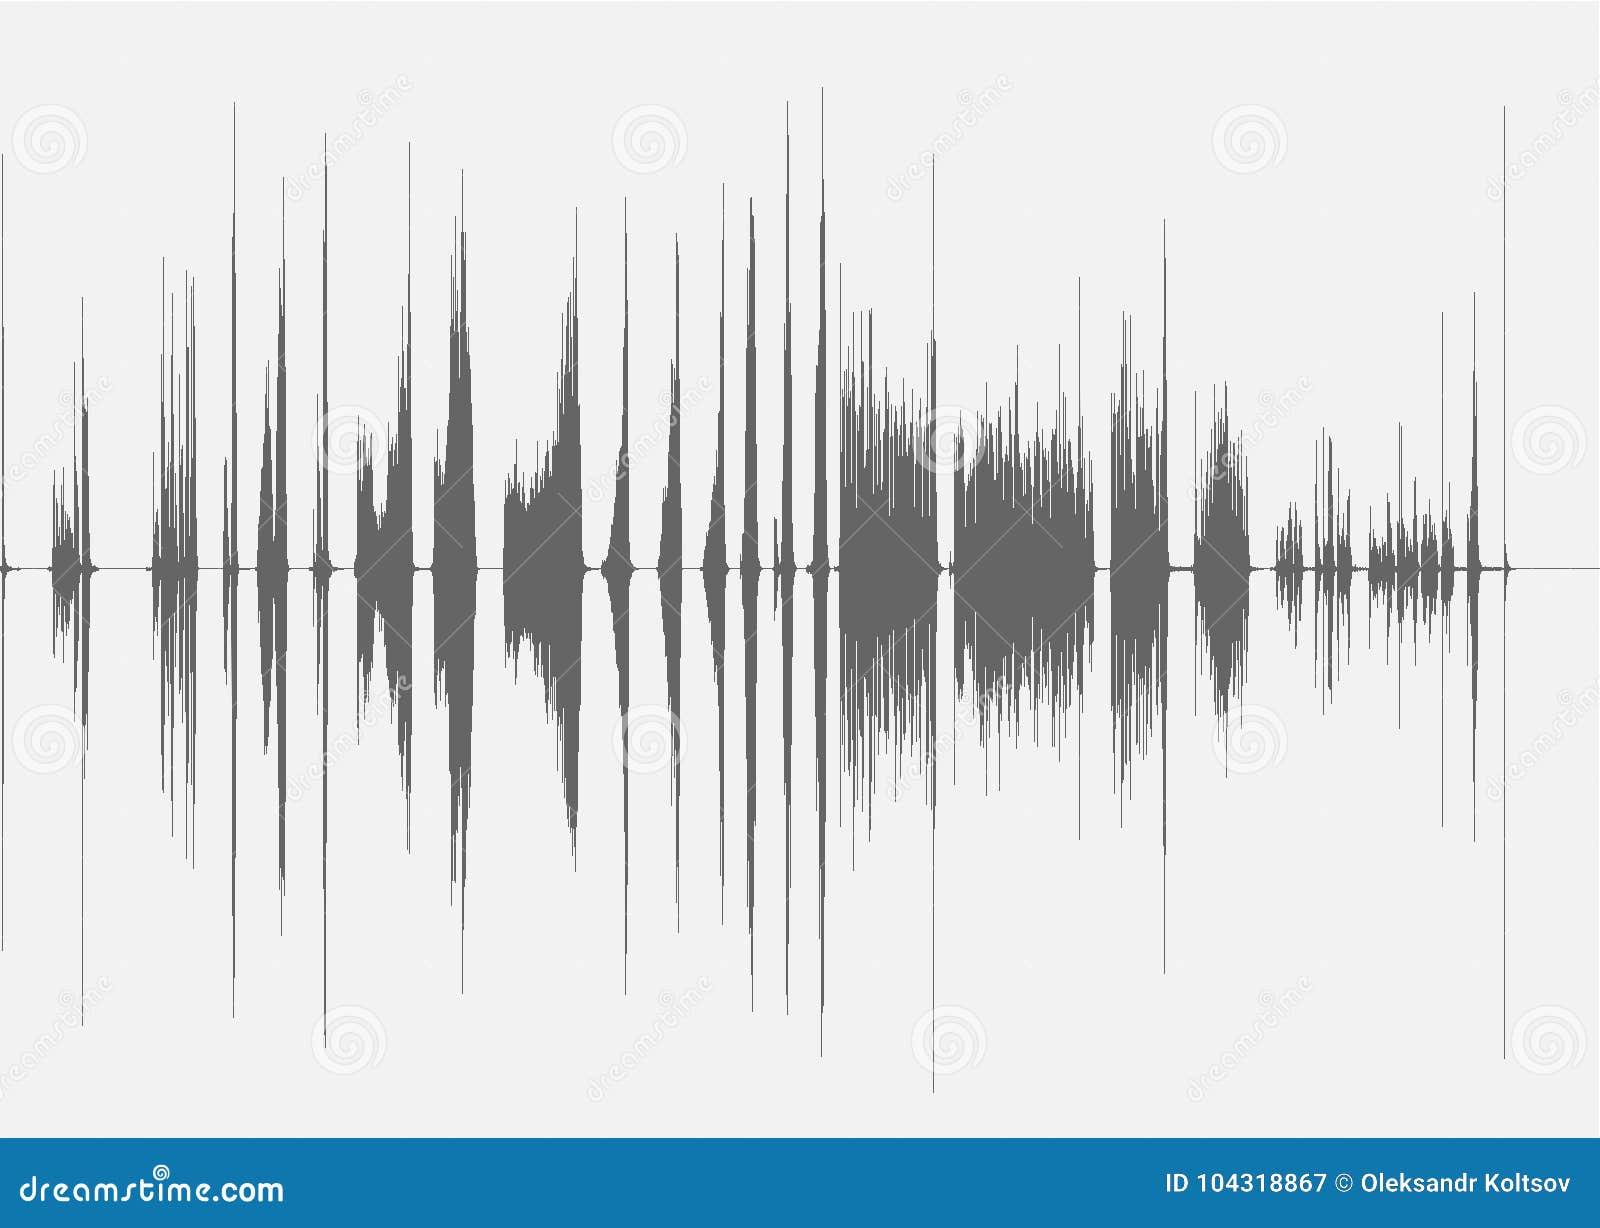 Royalty-Free Check Mark Sound Effects & Audio - Dreamstime